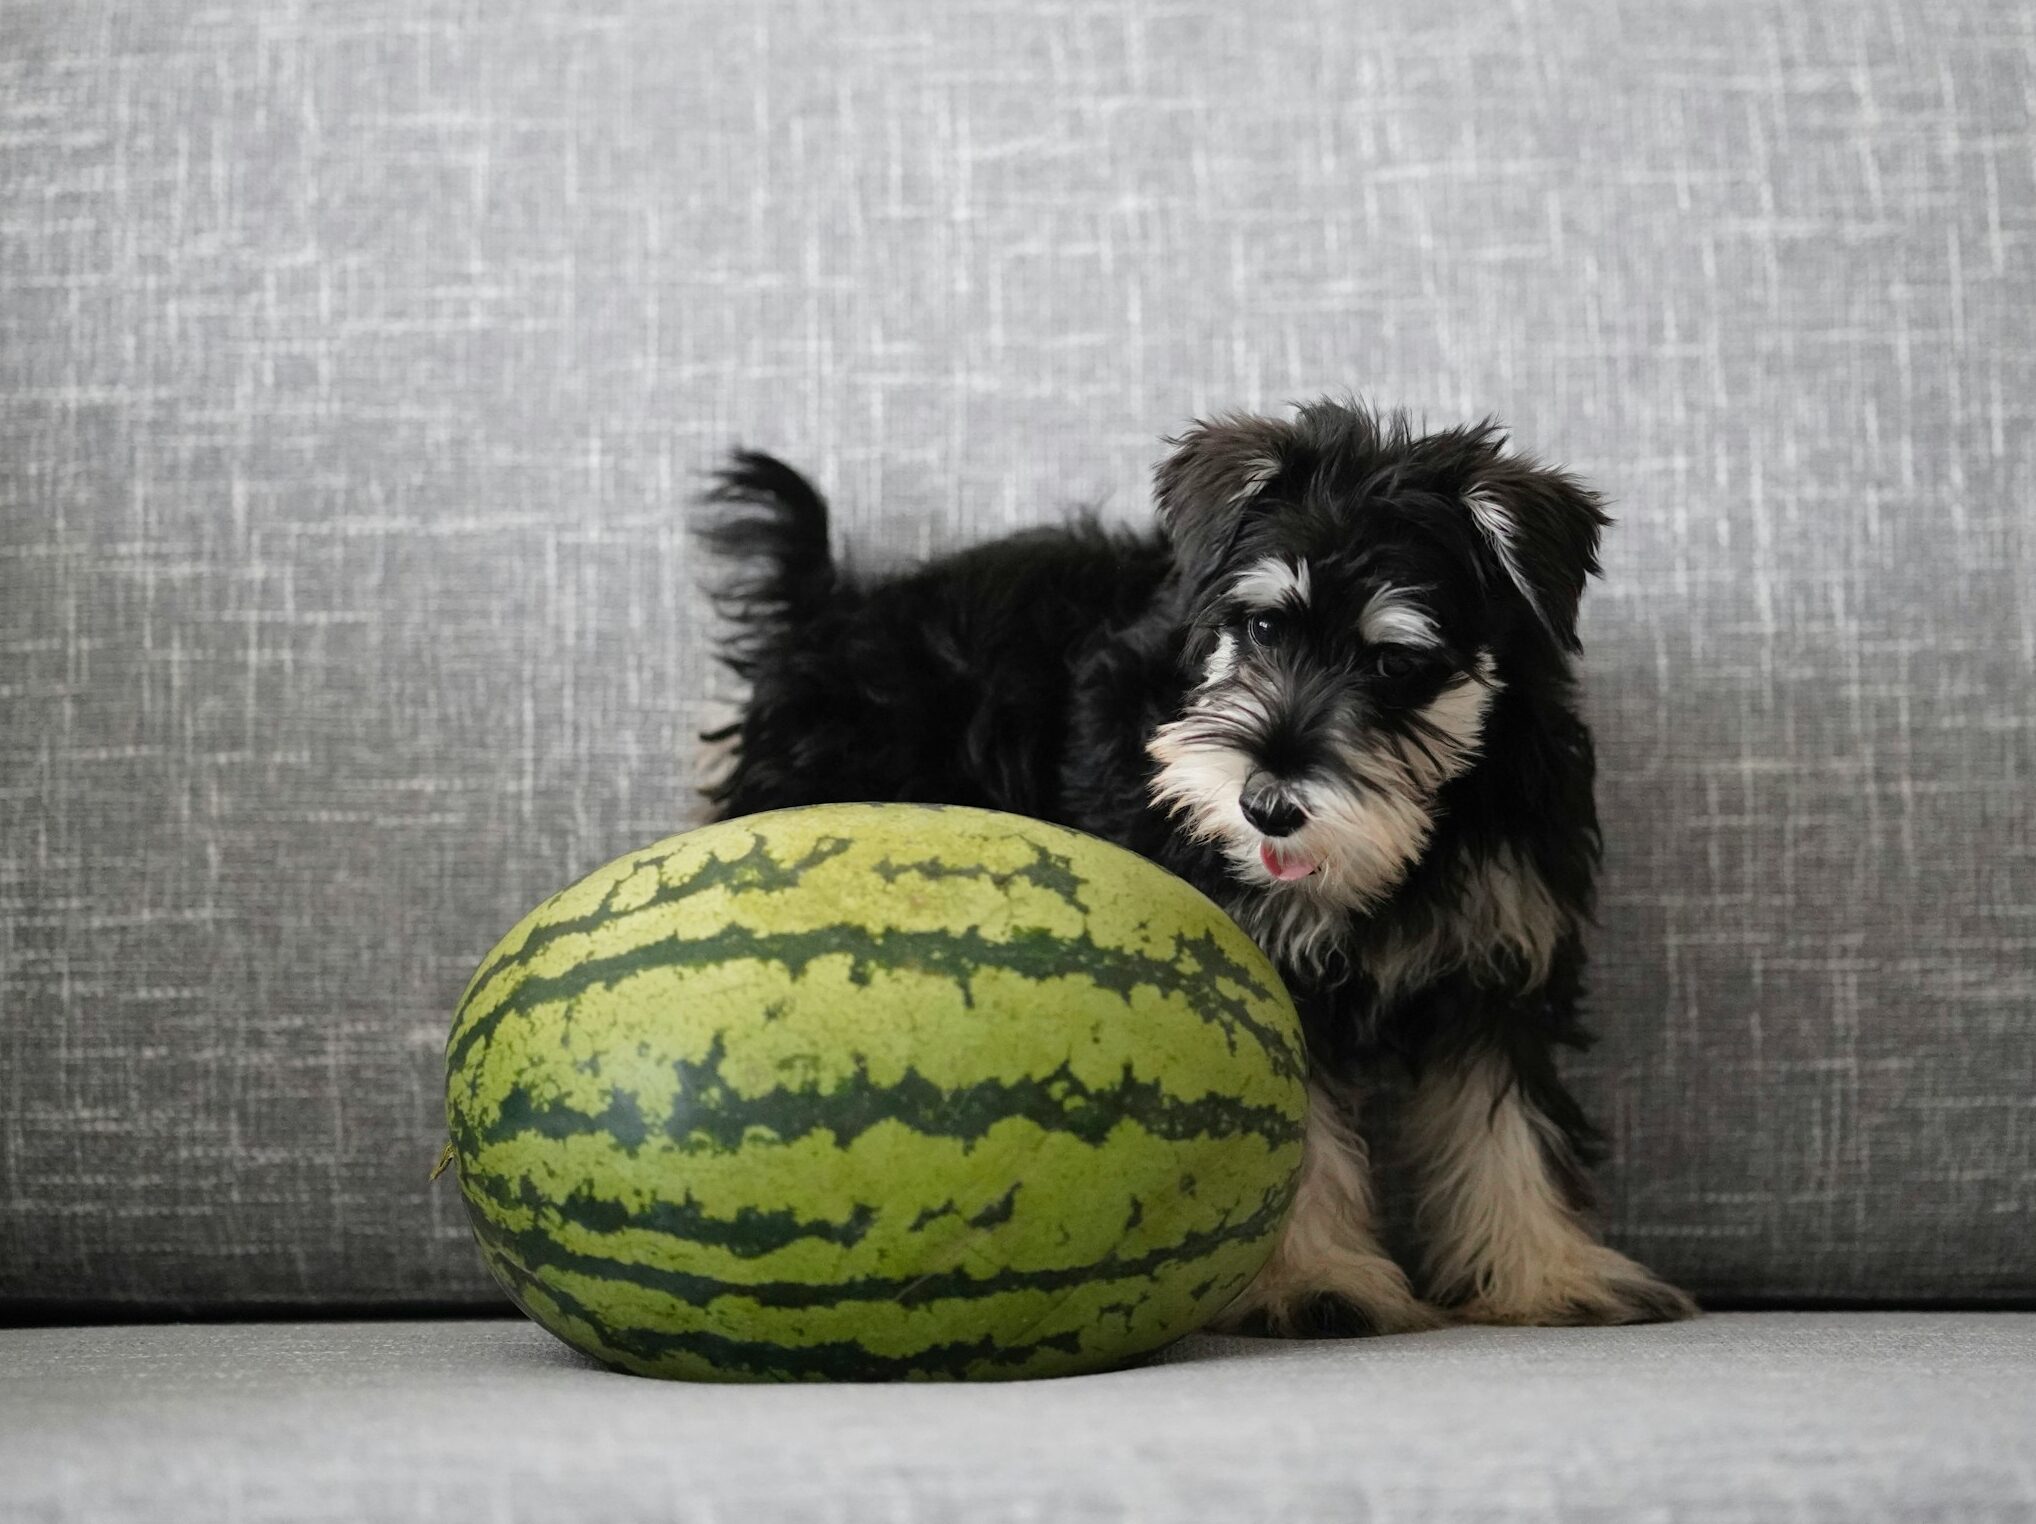 Cute puppy on couch next to a big watermelon